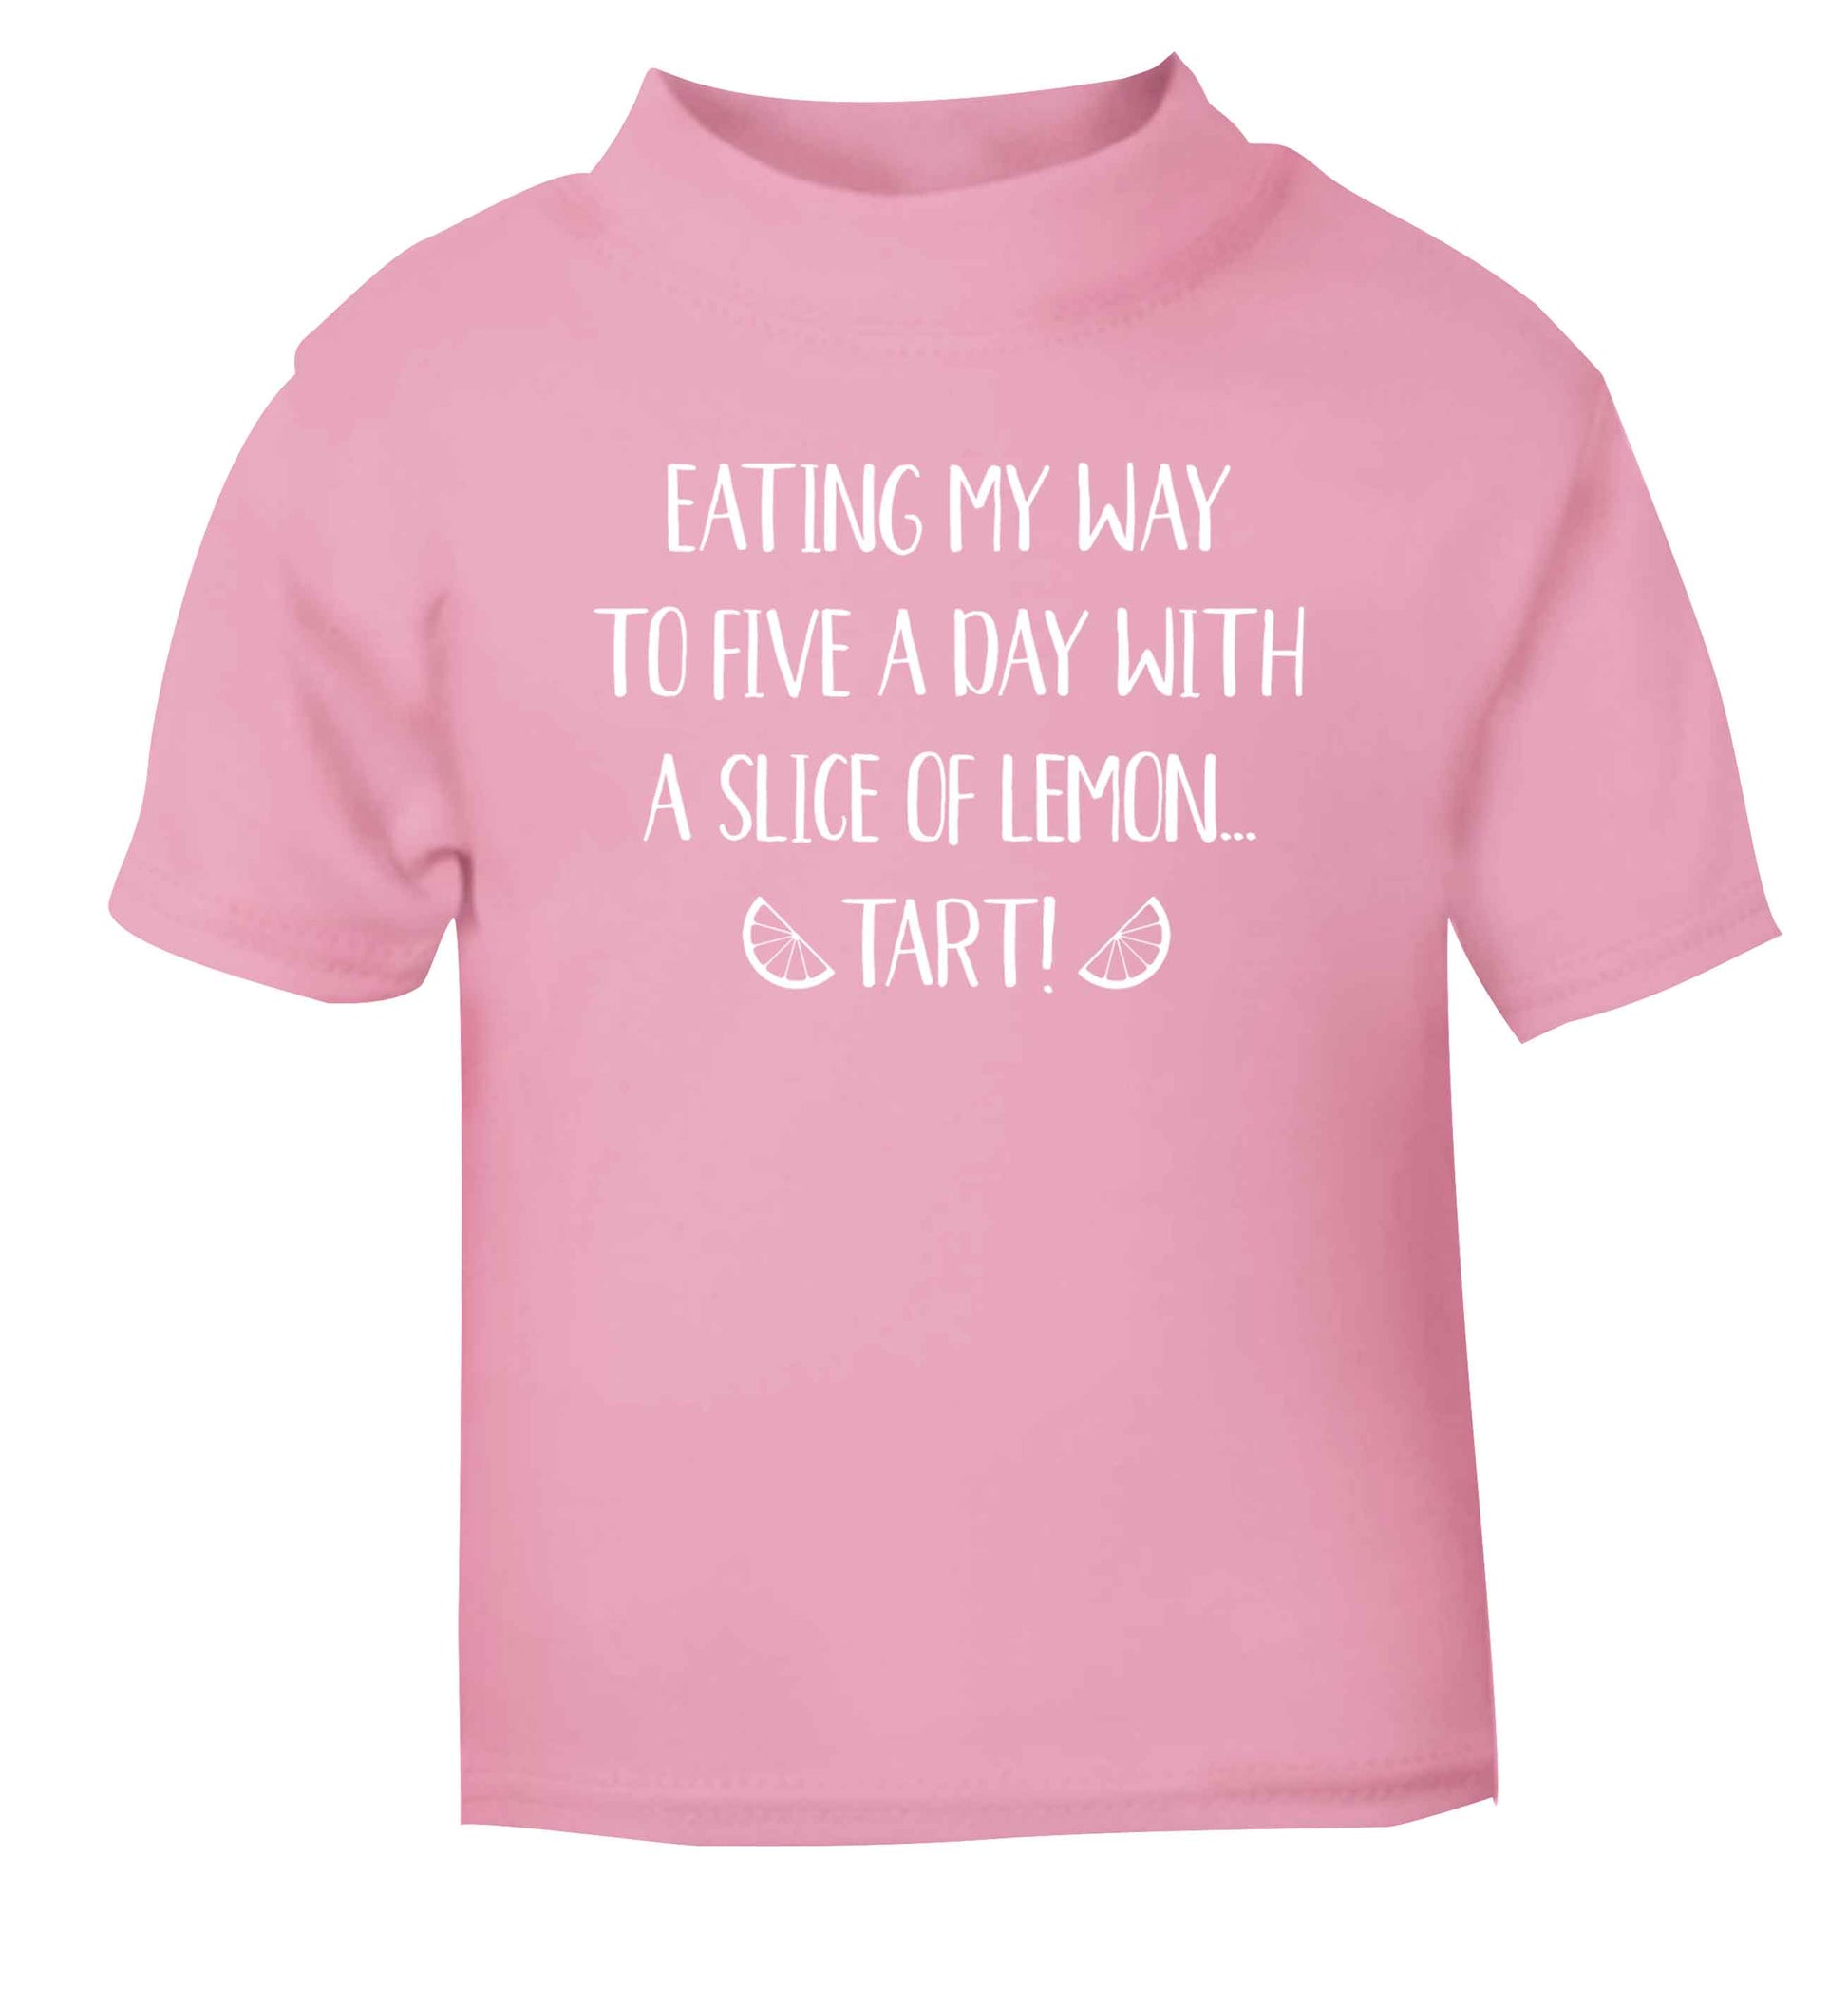 Eating my way to five a day with a slice of lemon tart light pink Baby Toddler Tshirt 2 Years